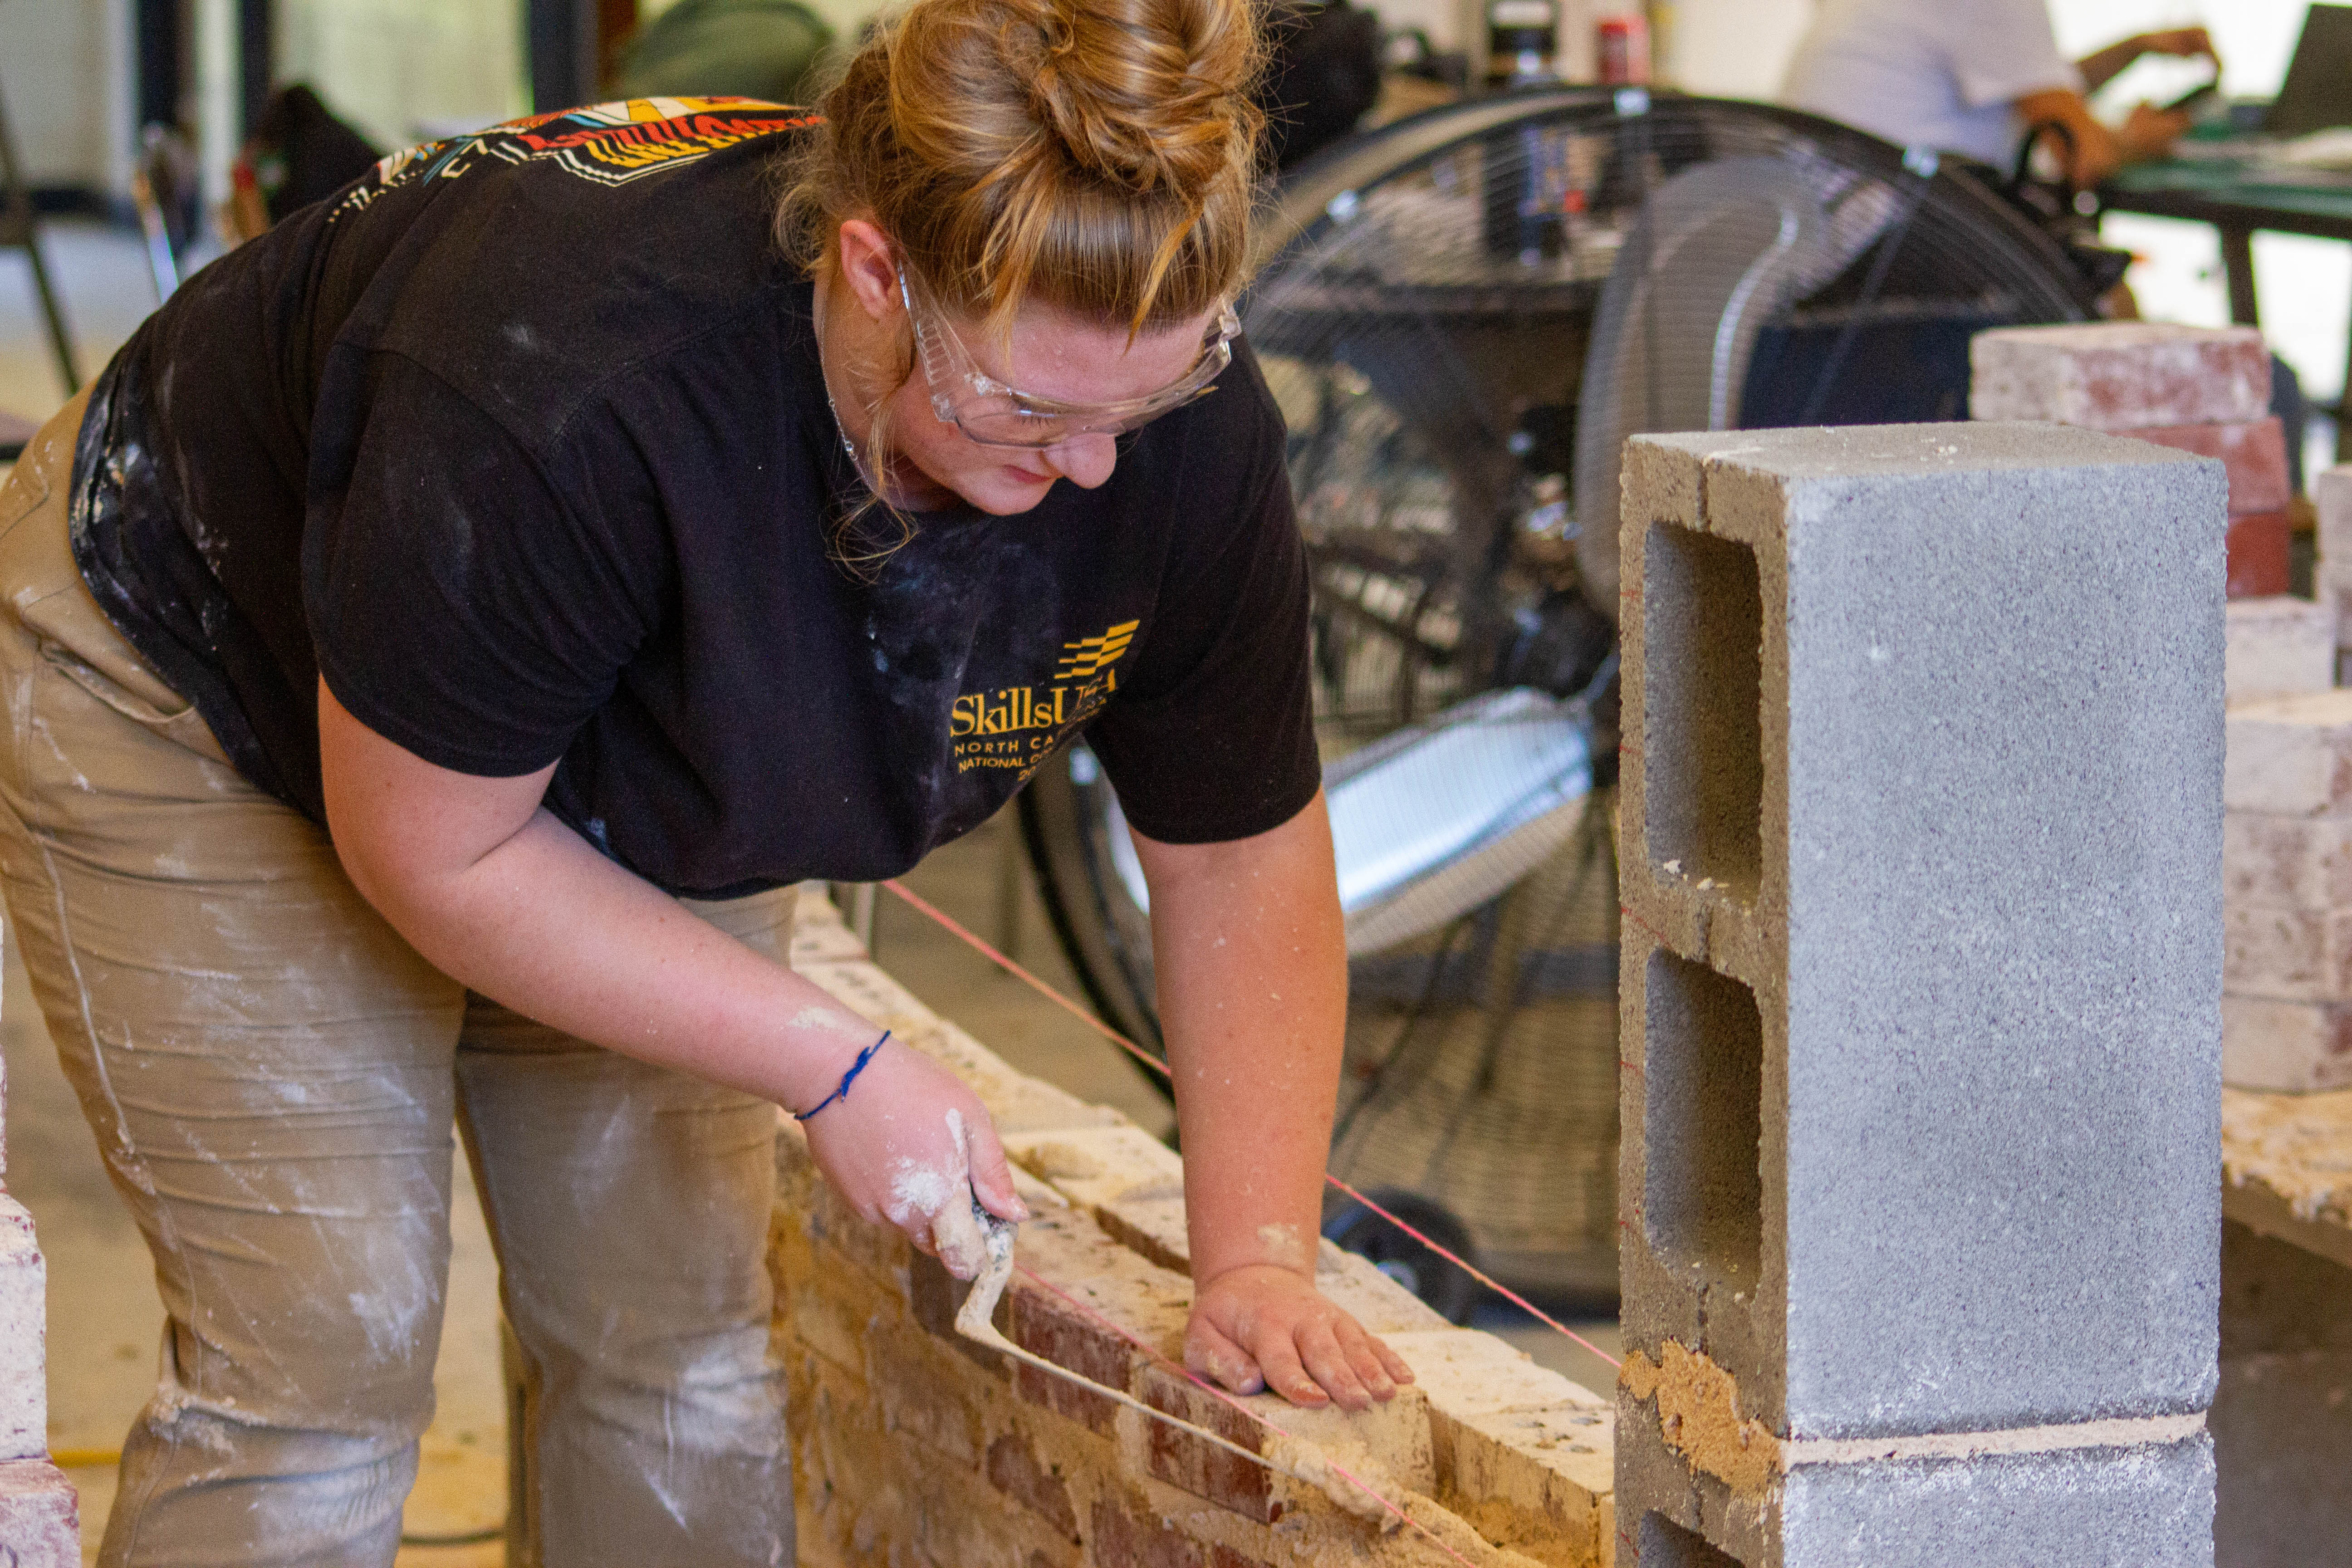 Christina C. practices laying a row of bricks in Masonry class at LCHS